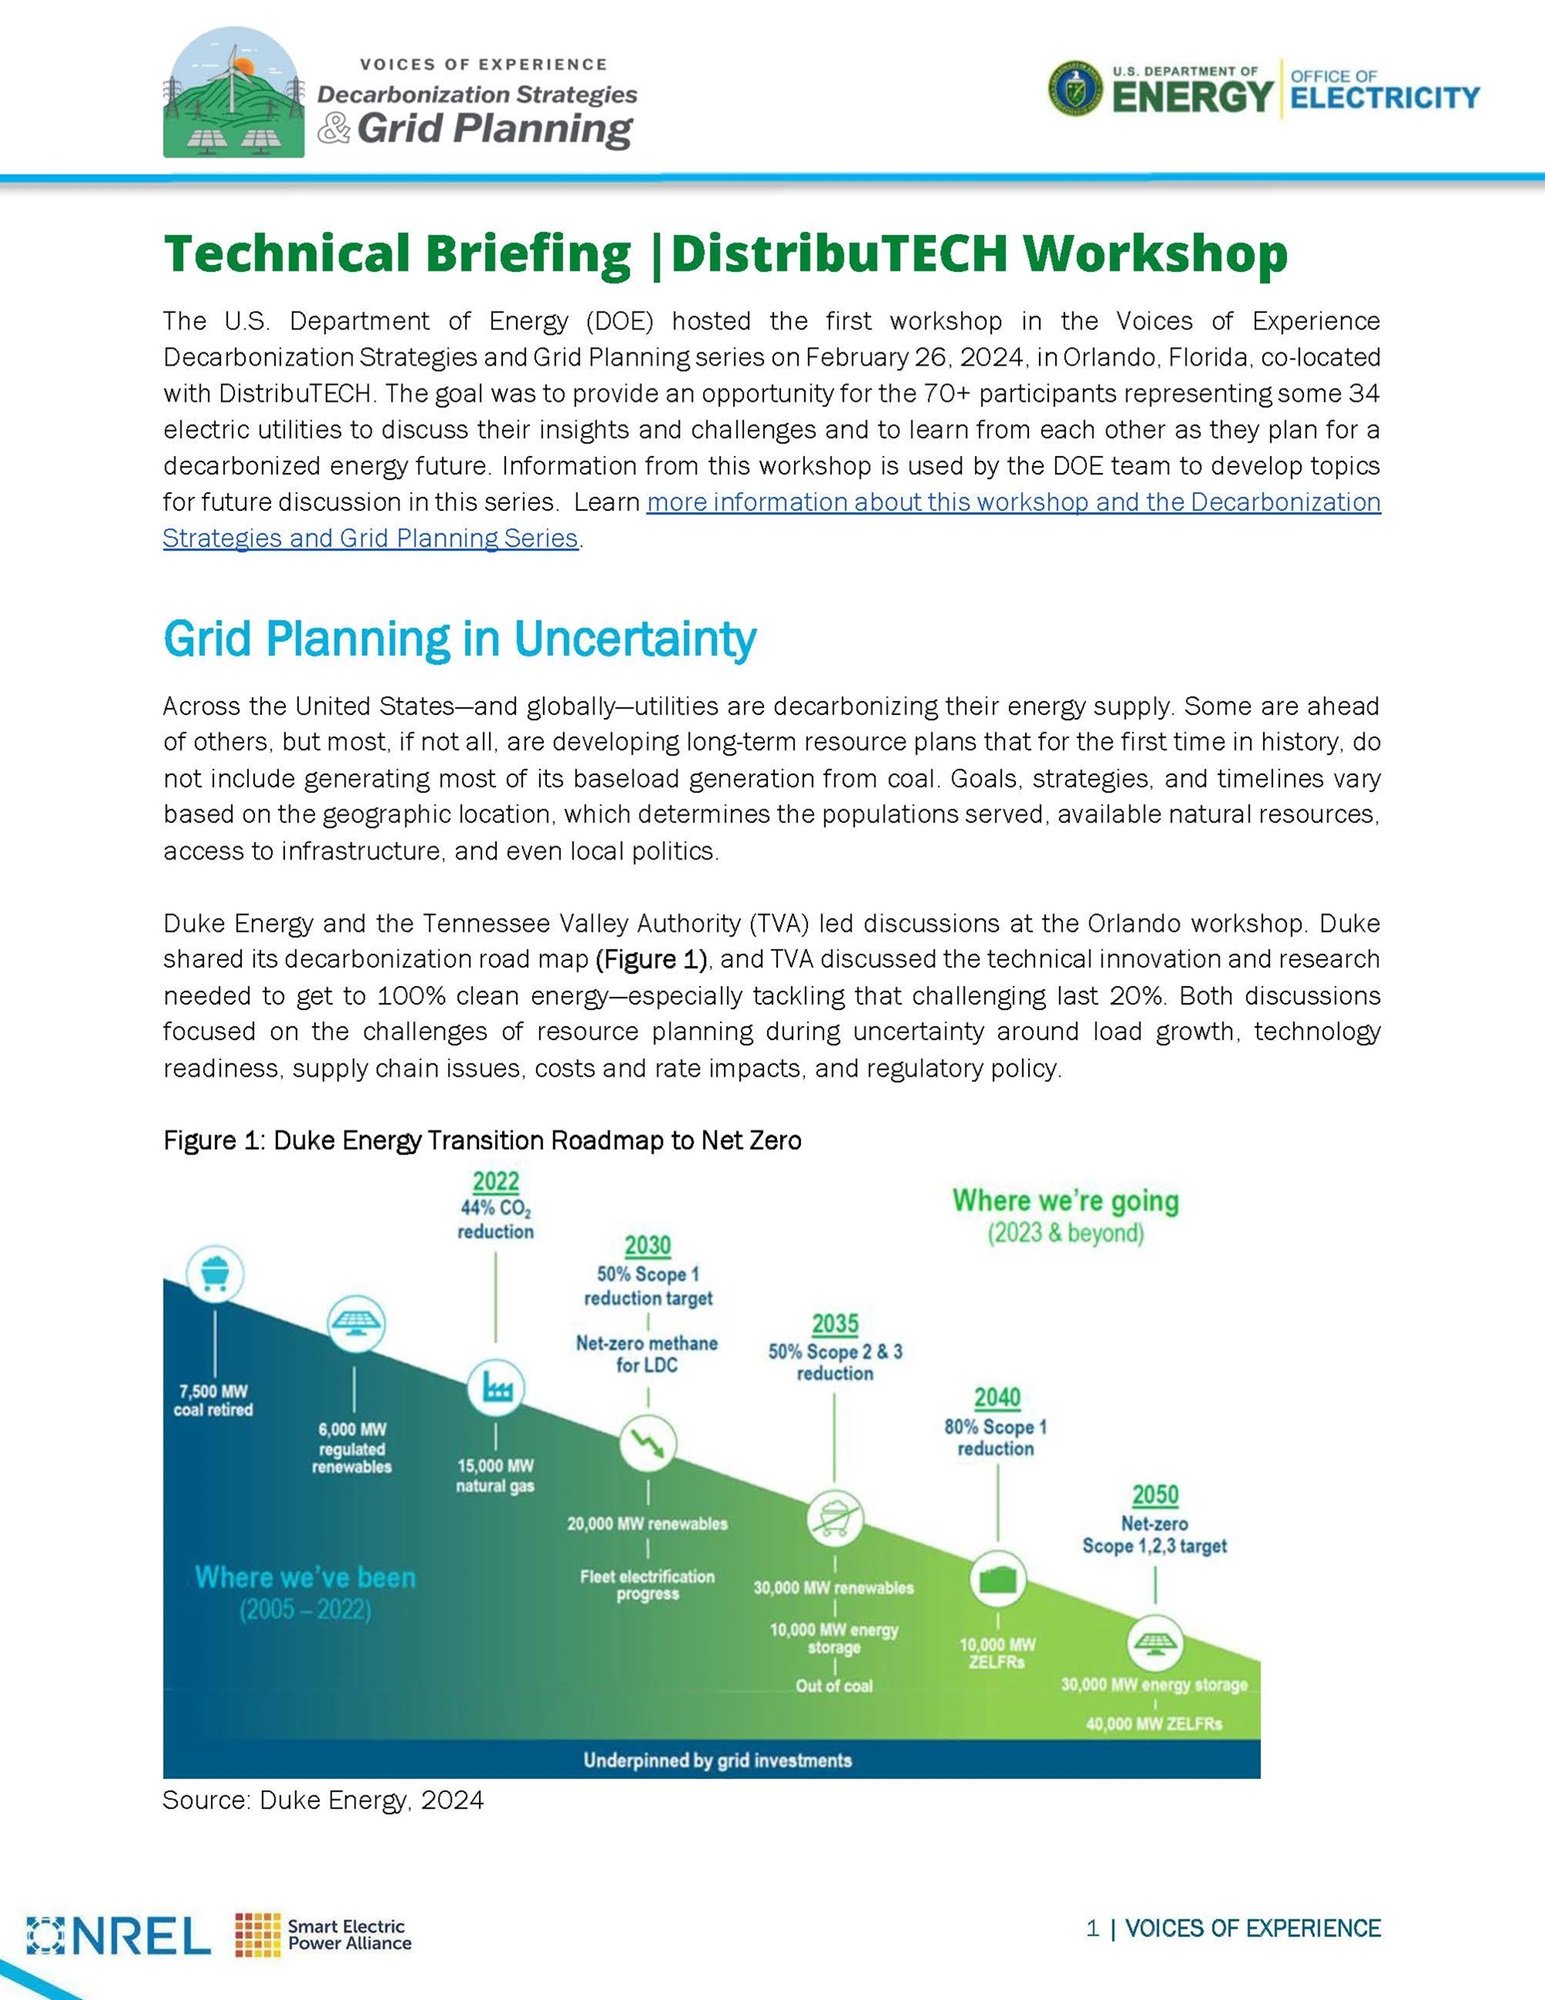 Technical Briefing on the Voices of Experience “Decarbonization Strategies and Grid Planning” Series Kickoff Workshop